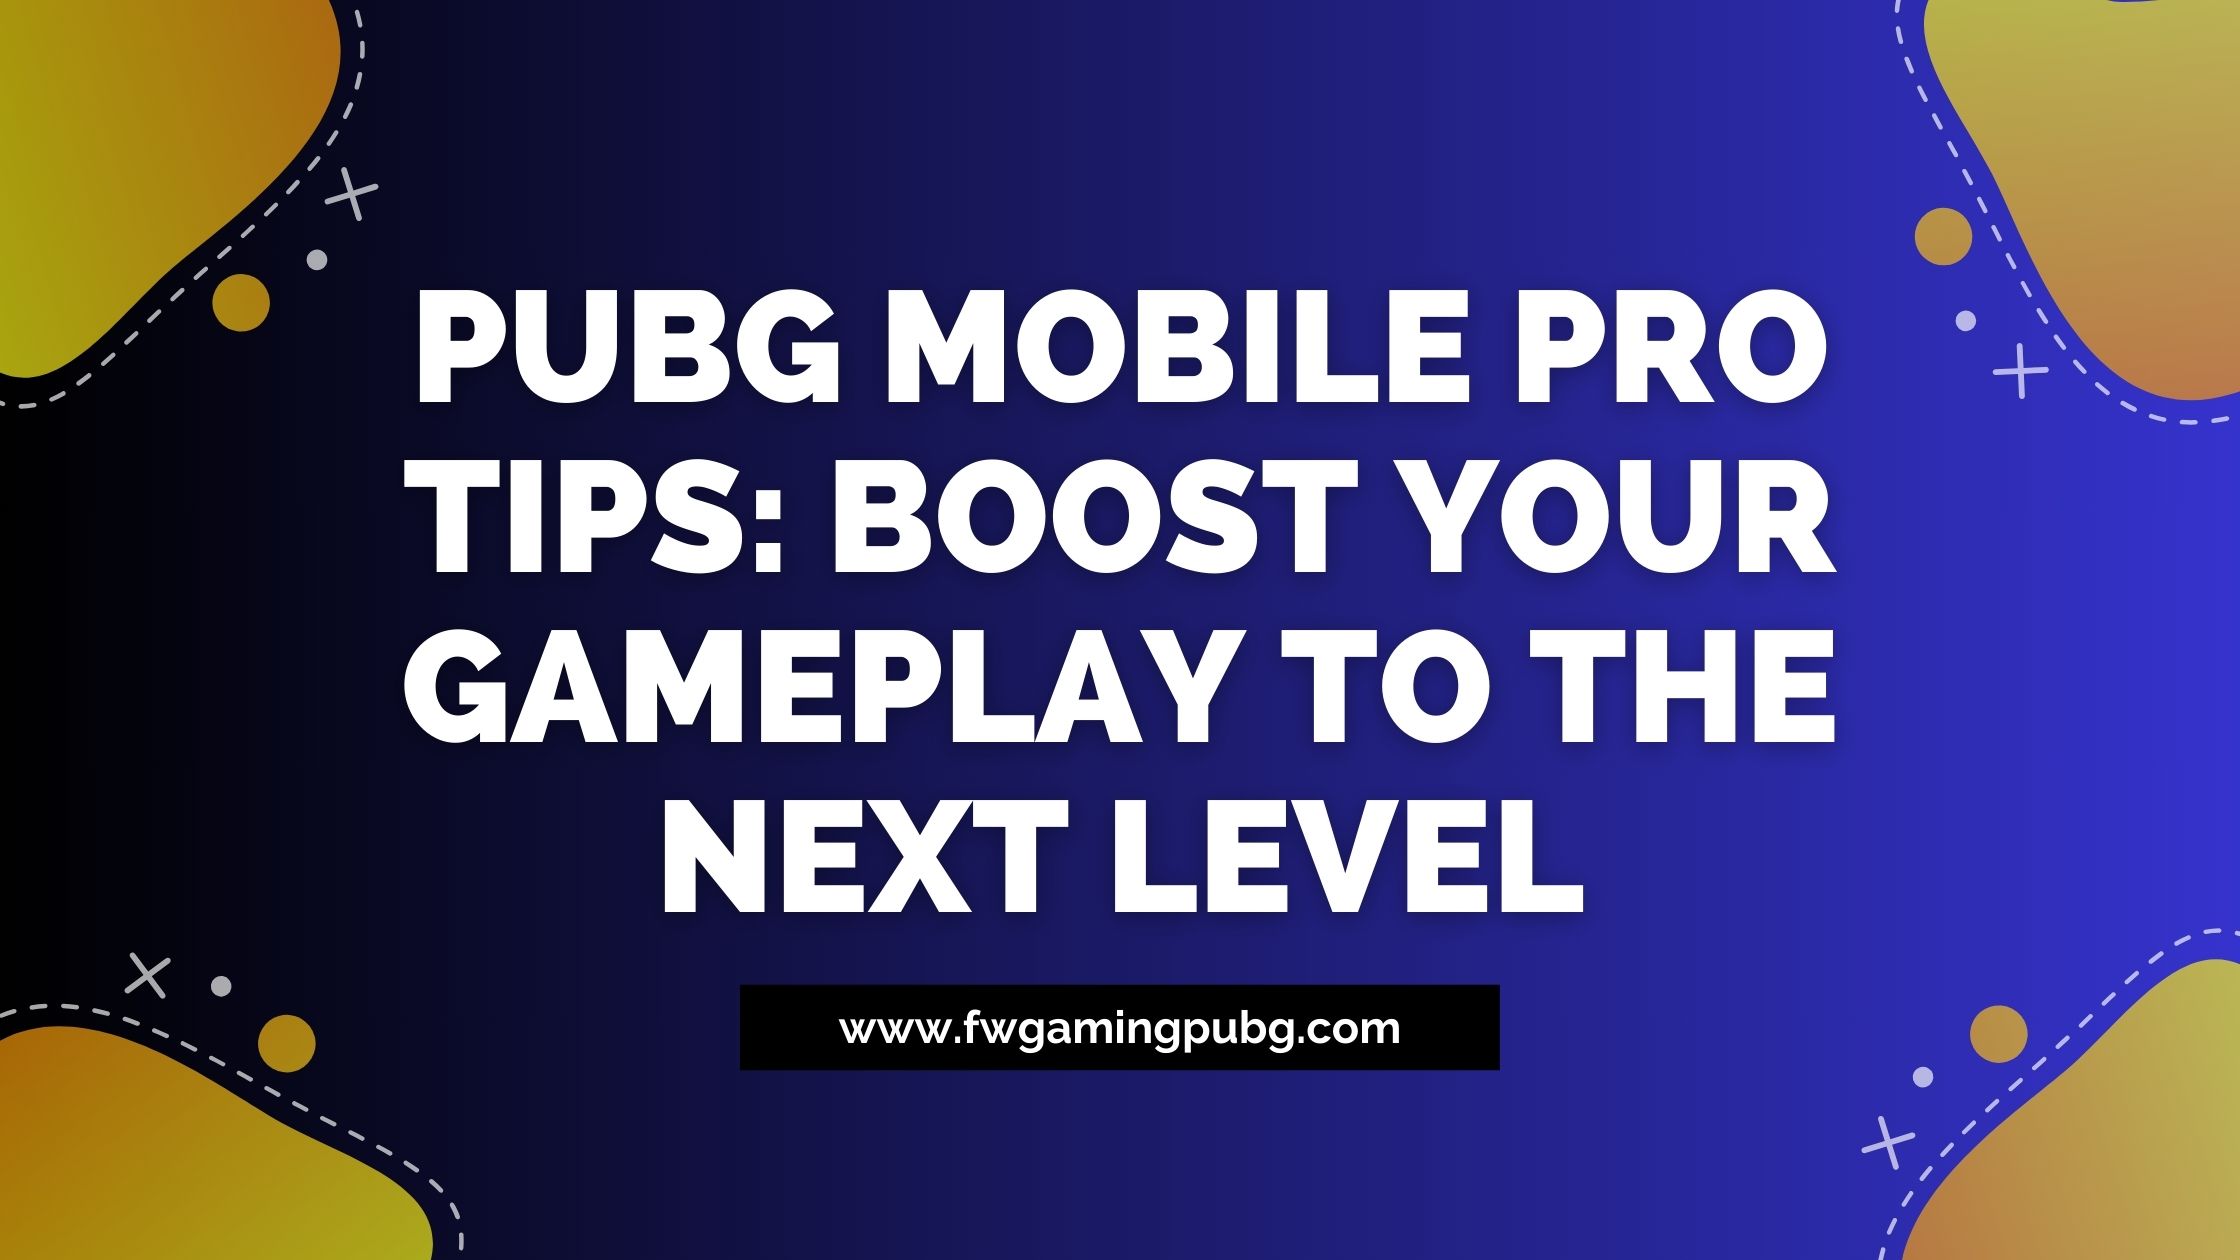 PUBG MOBILE Pro Tips: Boost Your Gameplay to the Next Level